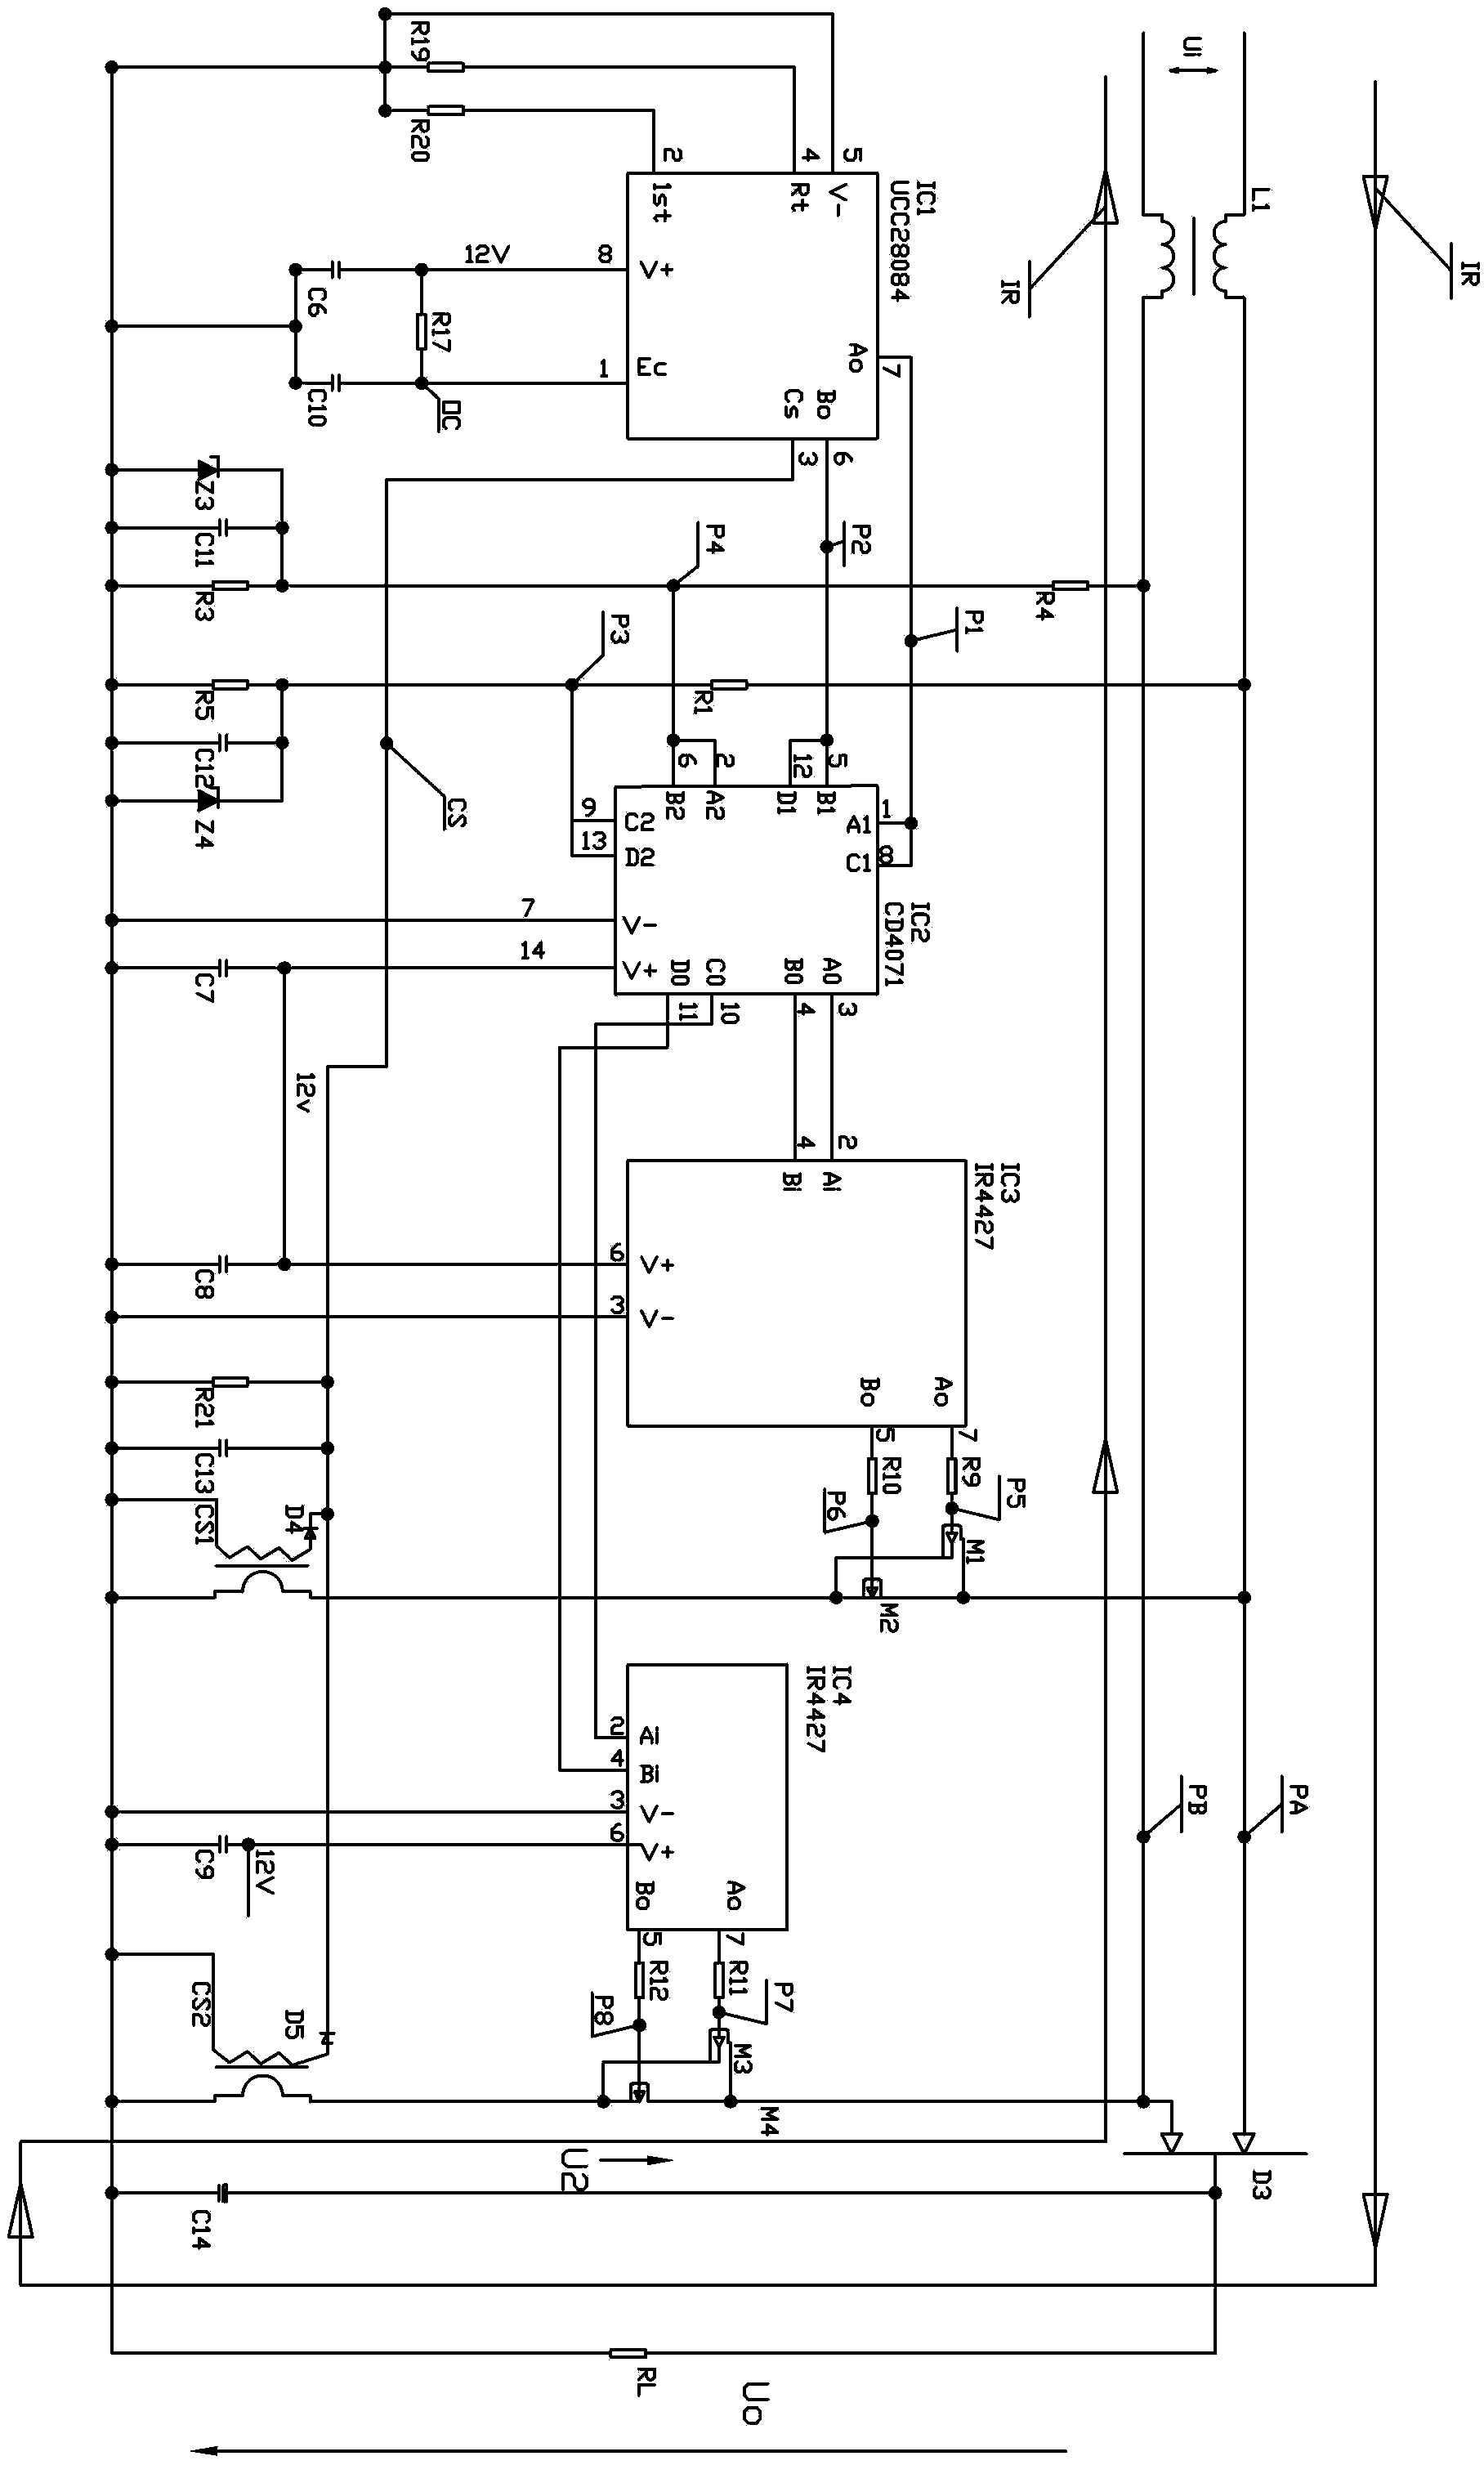 High-stable-output VMOS follow current conduction control circuit